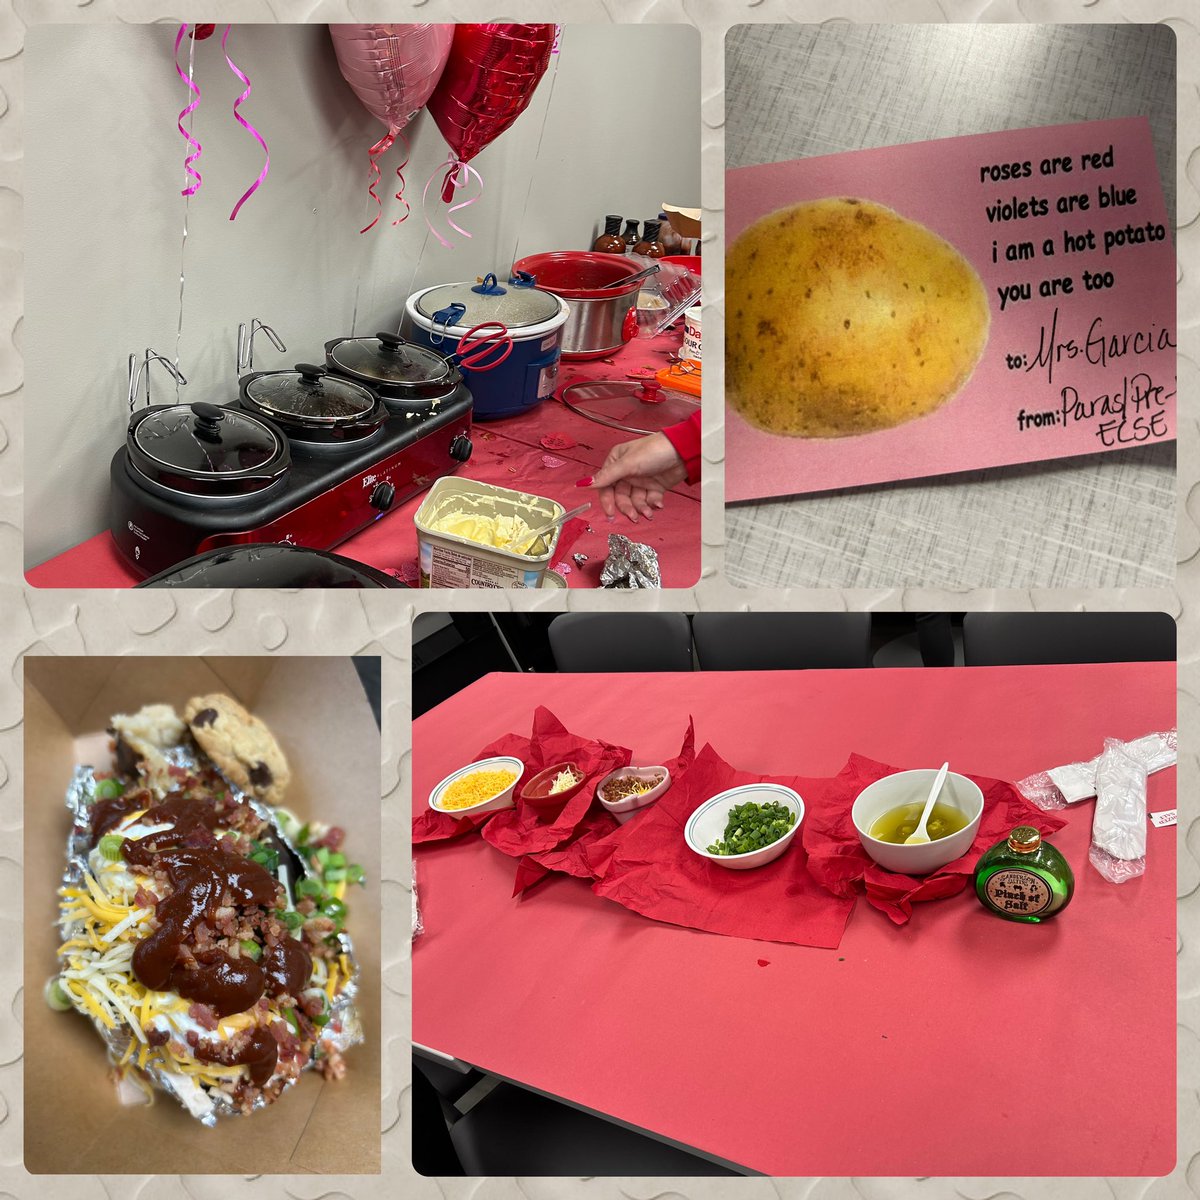 This months’s fun Friday treat was amazing! Our ECSE/Pre K/Paras truly spoiled us with delicious potatoes. #BOTB @BlackBearkats @CyFairISD